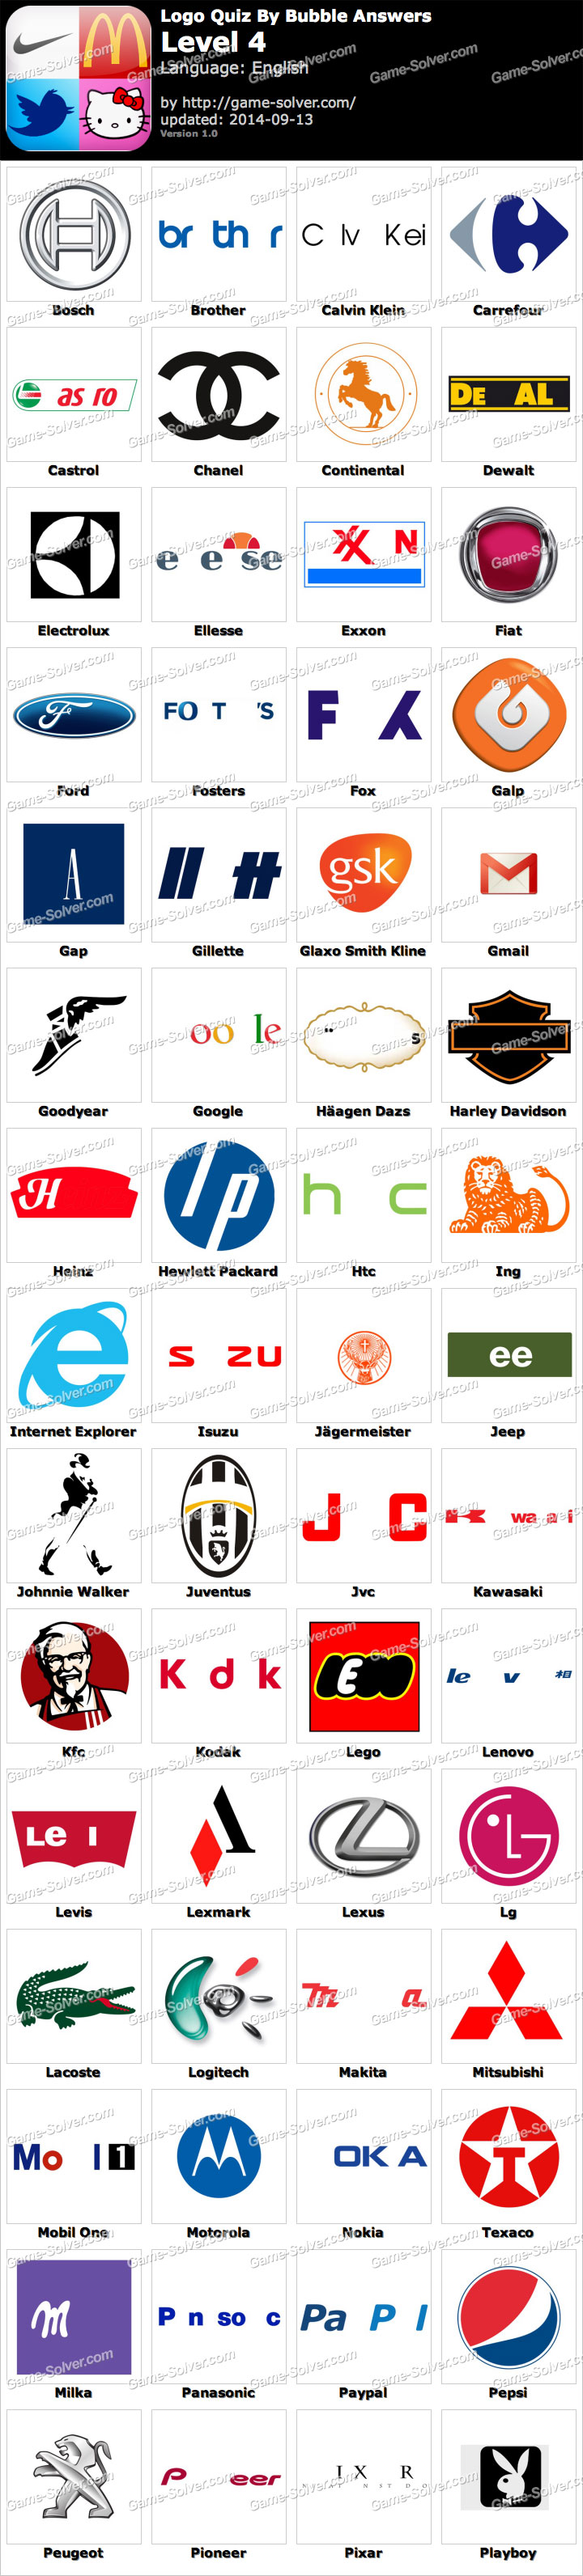 Logo Quiz Level 4 Answers! All Levels! Fast search!